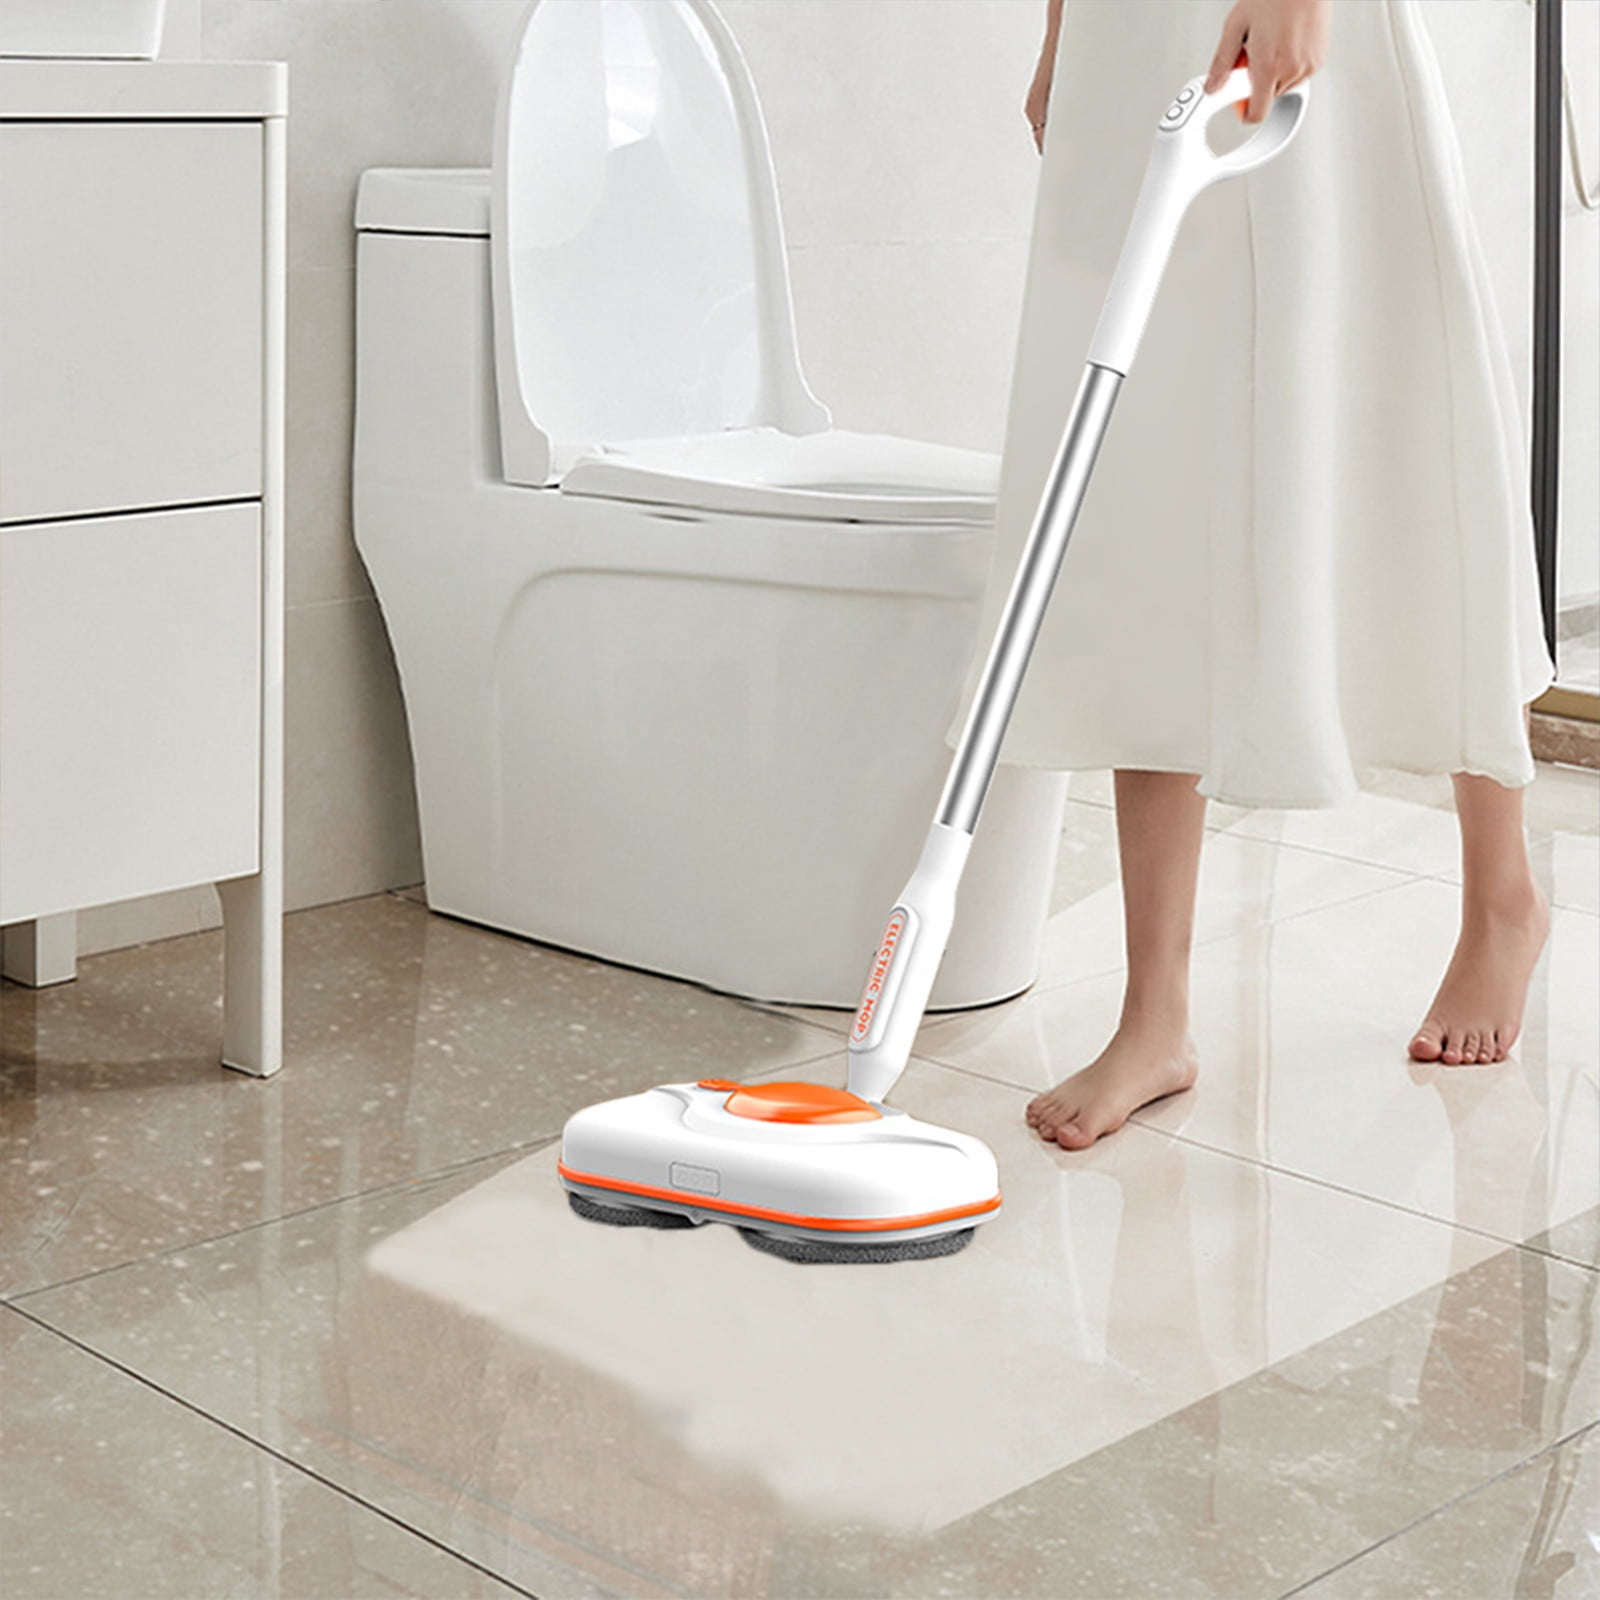 Cordless Electric Mop, Electric Spin Mop with LED Headlight and Water  Spray, Up to 60 mins Powerful Floor Cleaner with 300ml Water Tank, Polisher  for Hardwood, Tile Floors, Quiet Cleaning & Waxing : Health & Household 